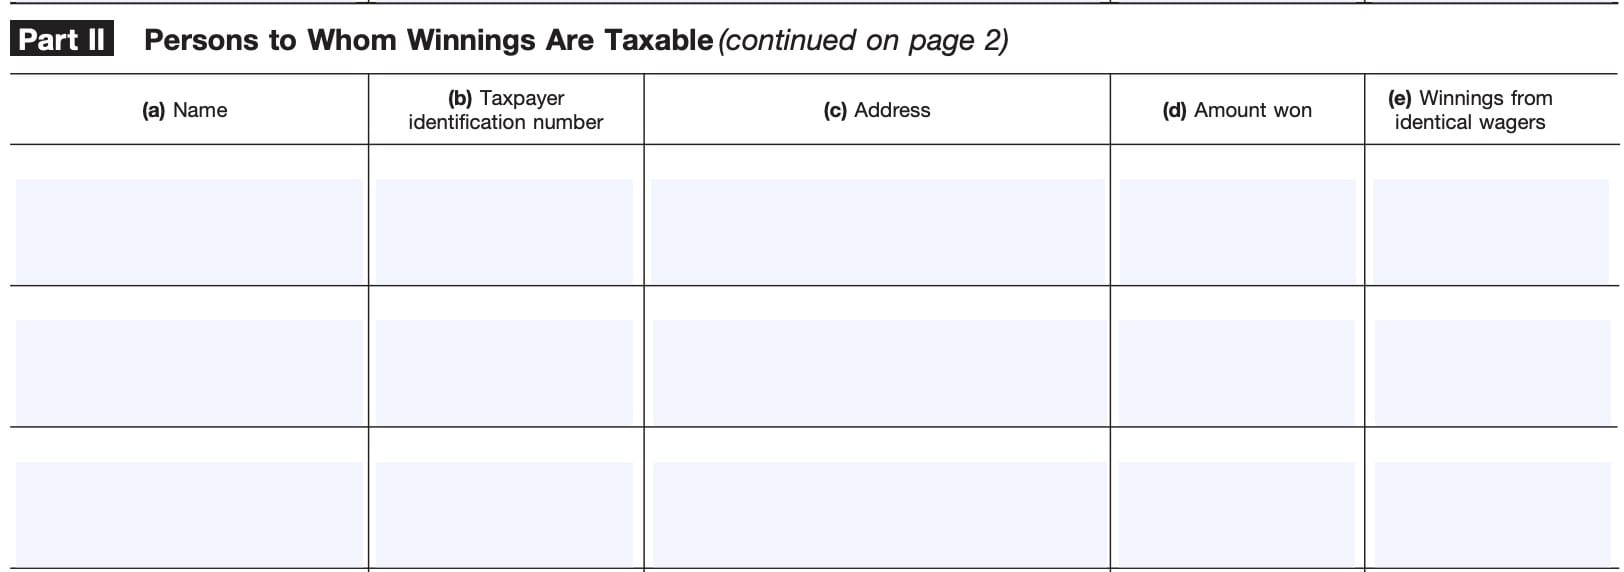 irs form 5754 part ii: persons to whom winnings are taxable 